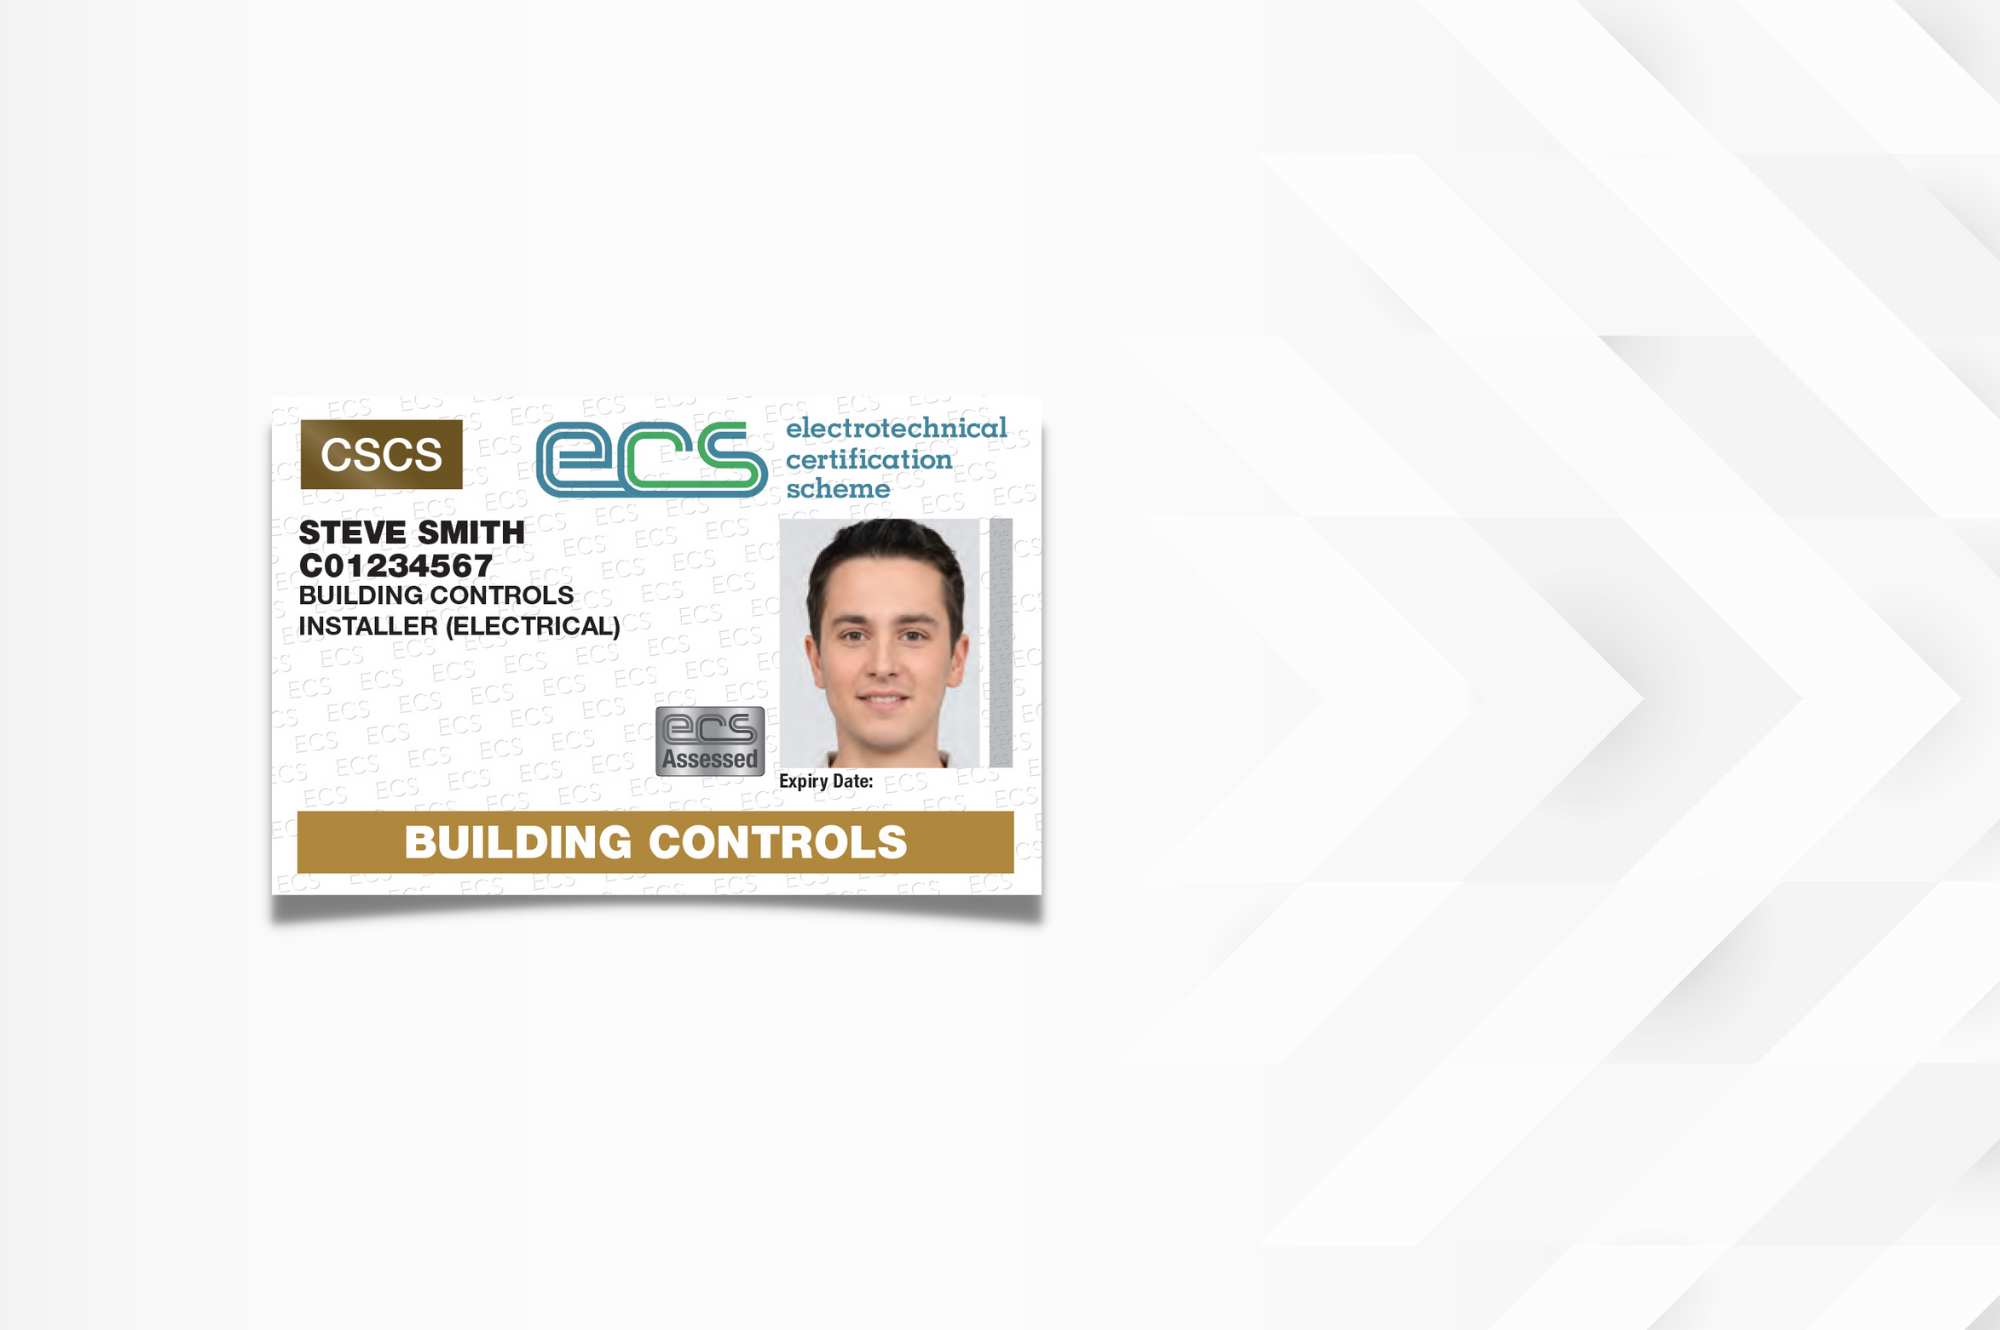 New ECS cards launched for Building Controls sector